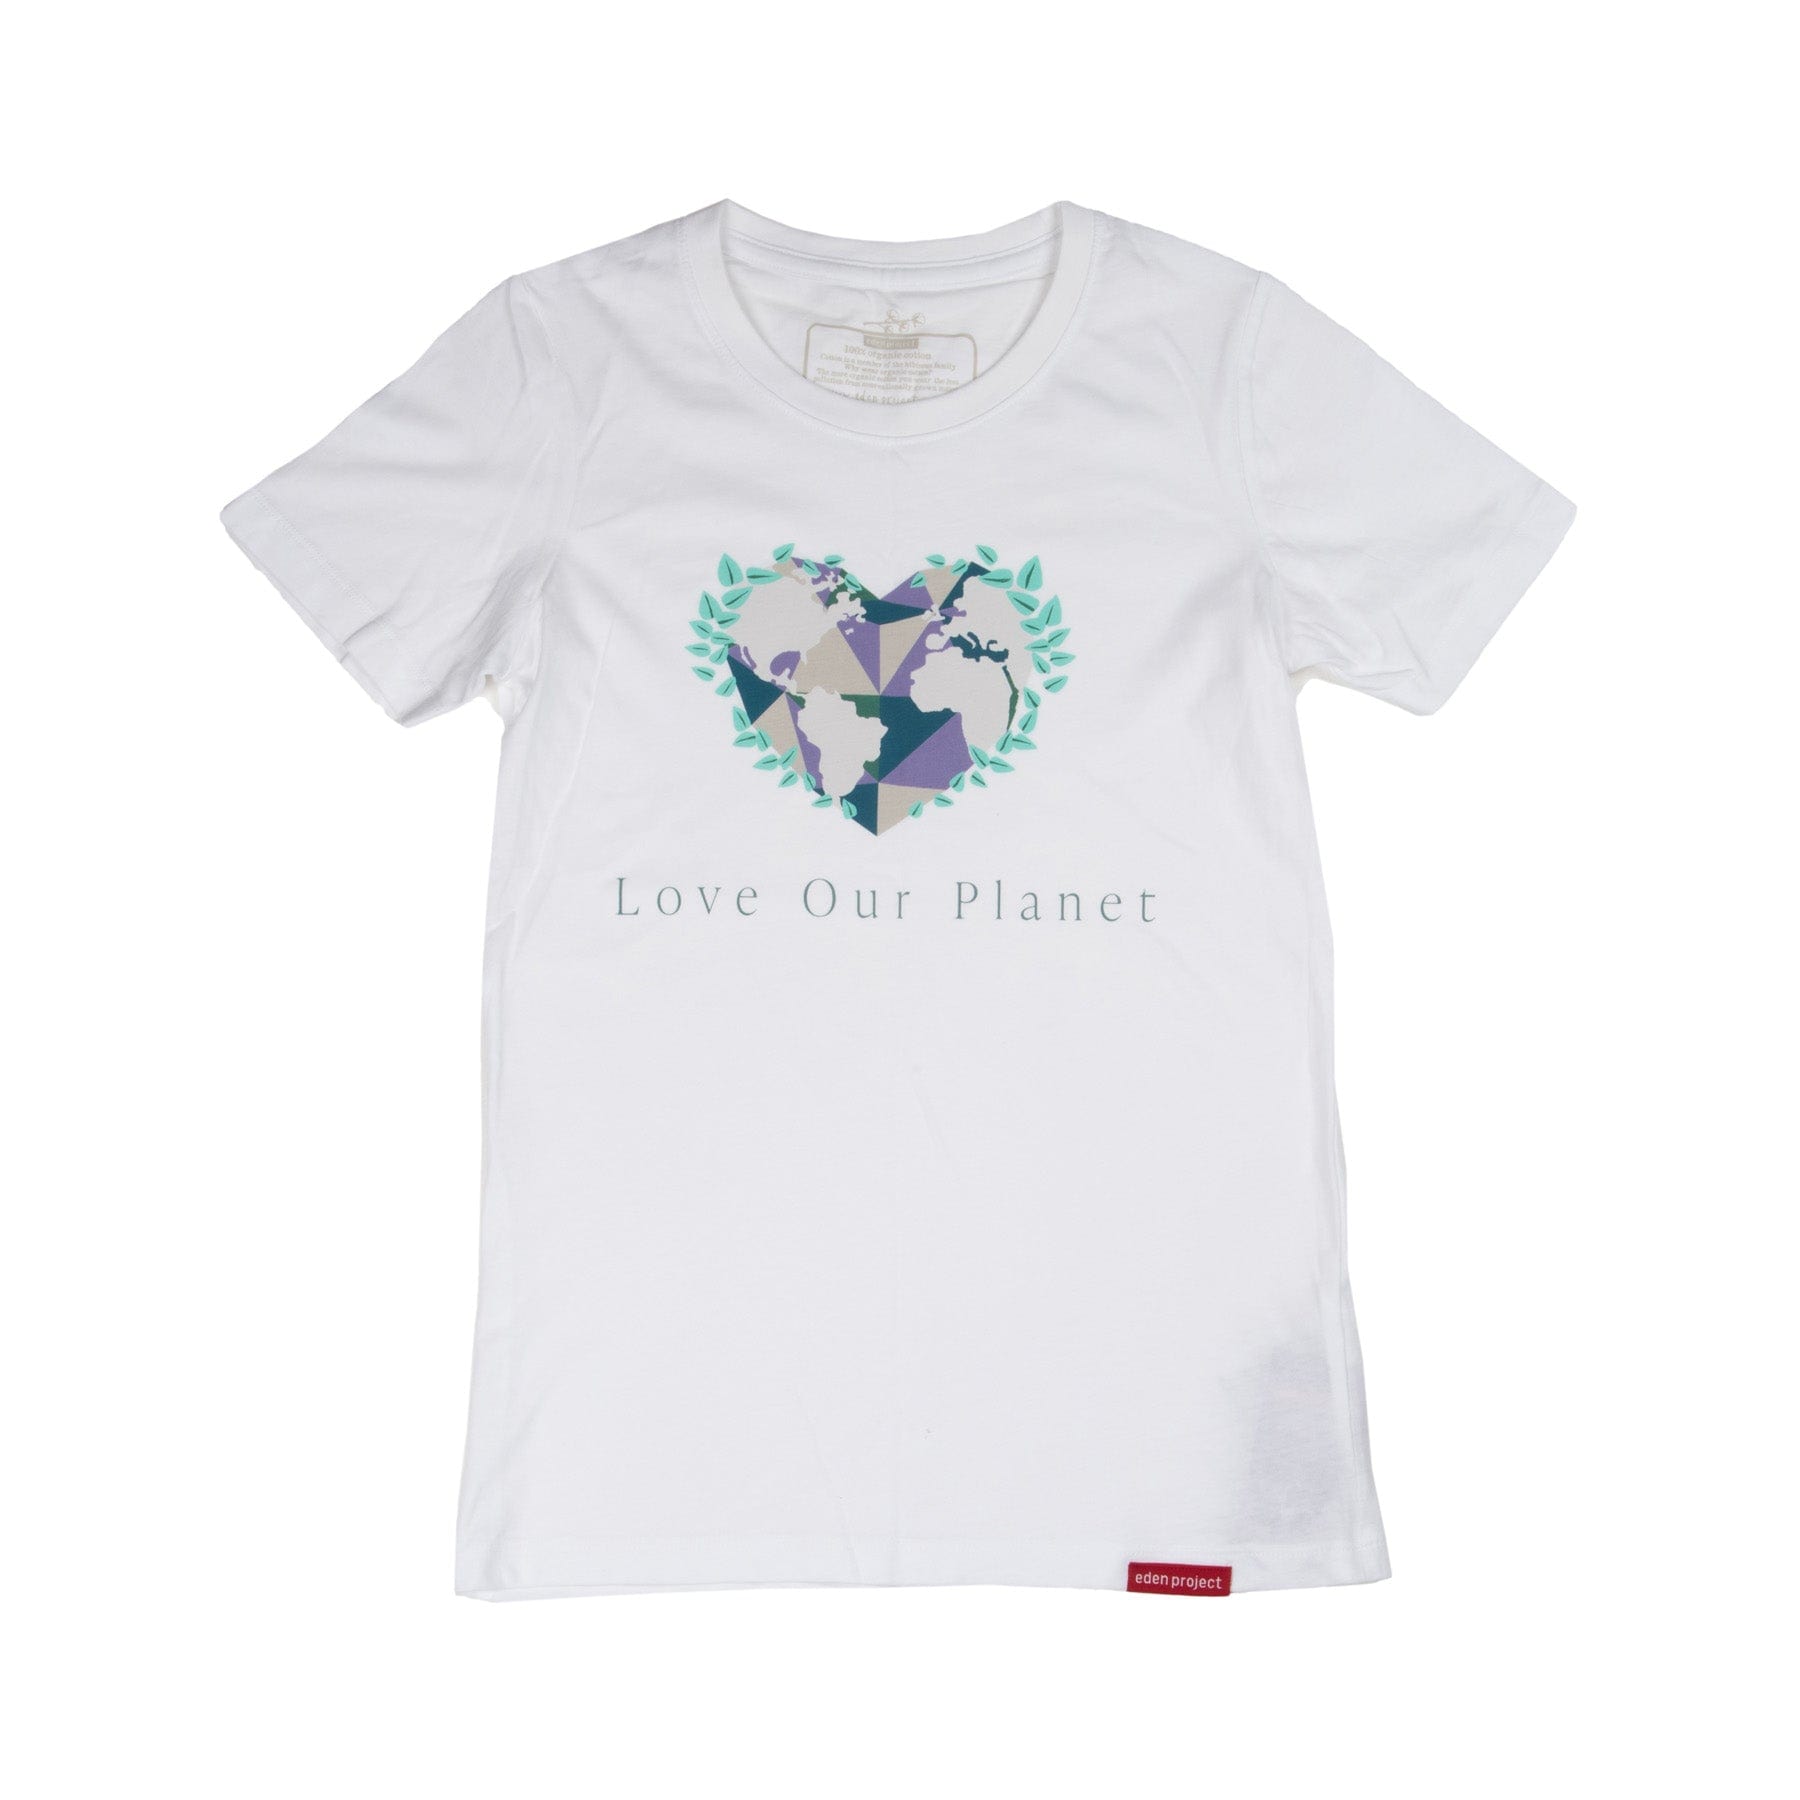 White eco-friendly t-shirt with heart-shaped earth design and "Love Our Planet" text, sustainable fashion, isolated on white background.